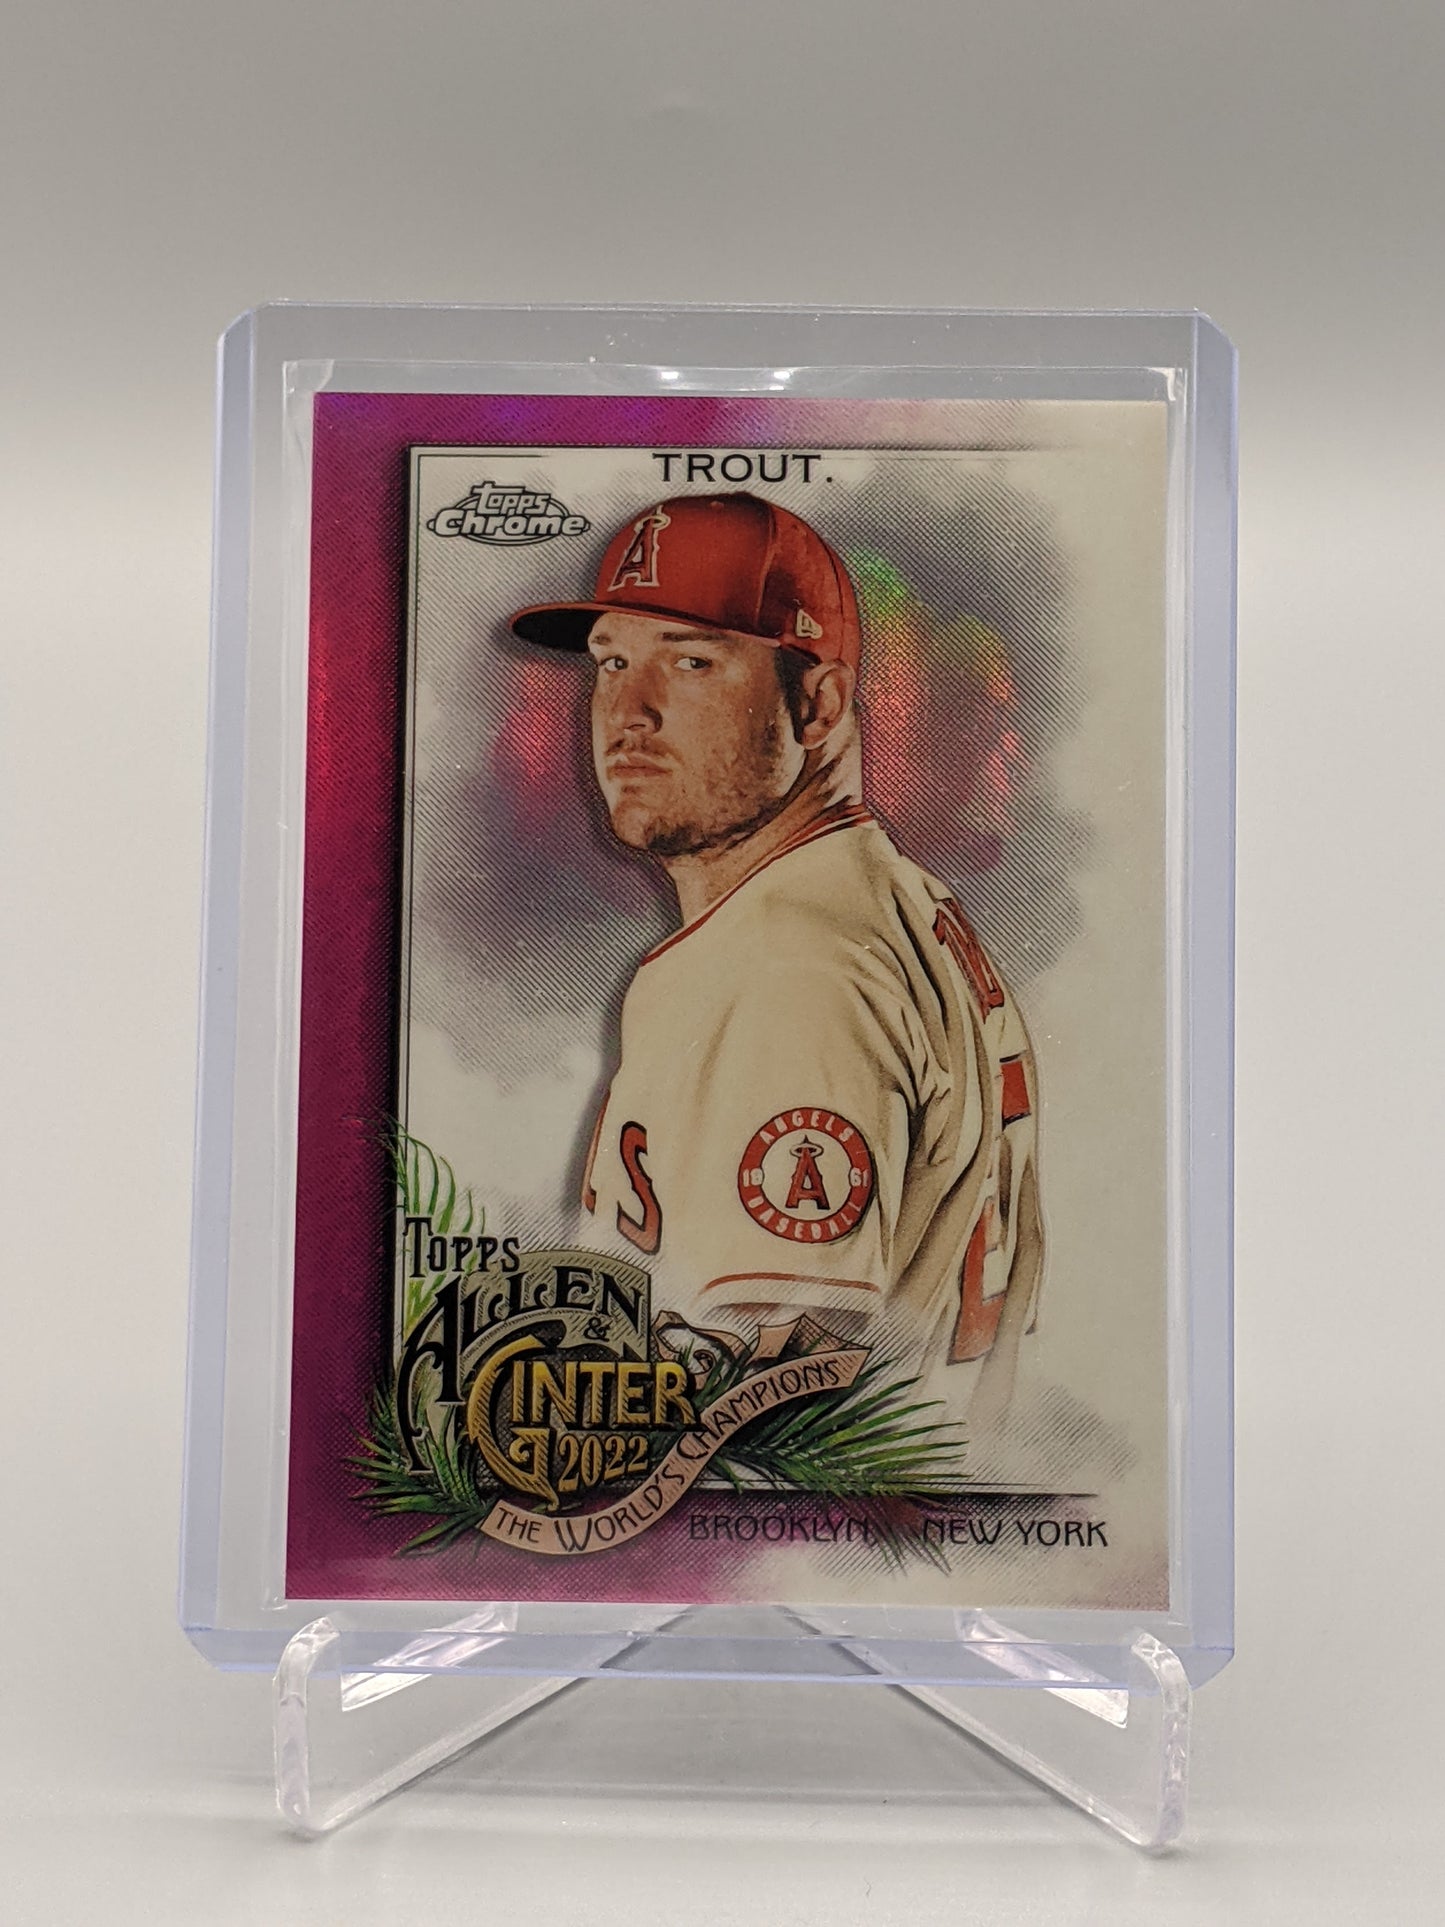 2022 Topps Allen & Ginter Chrome Magenta Refractor #35 Mike Trout #/199 Angels